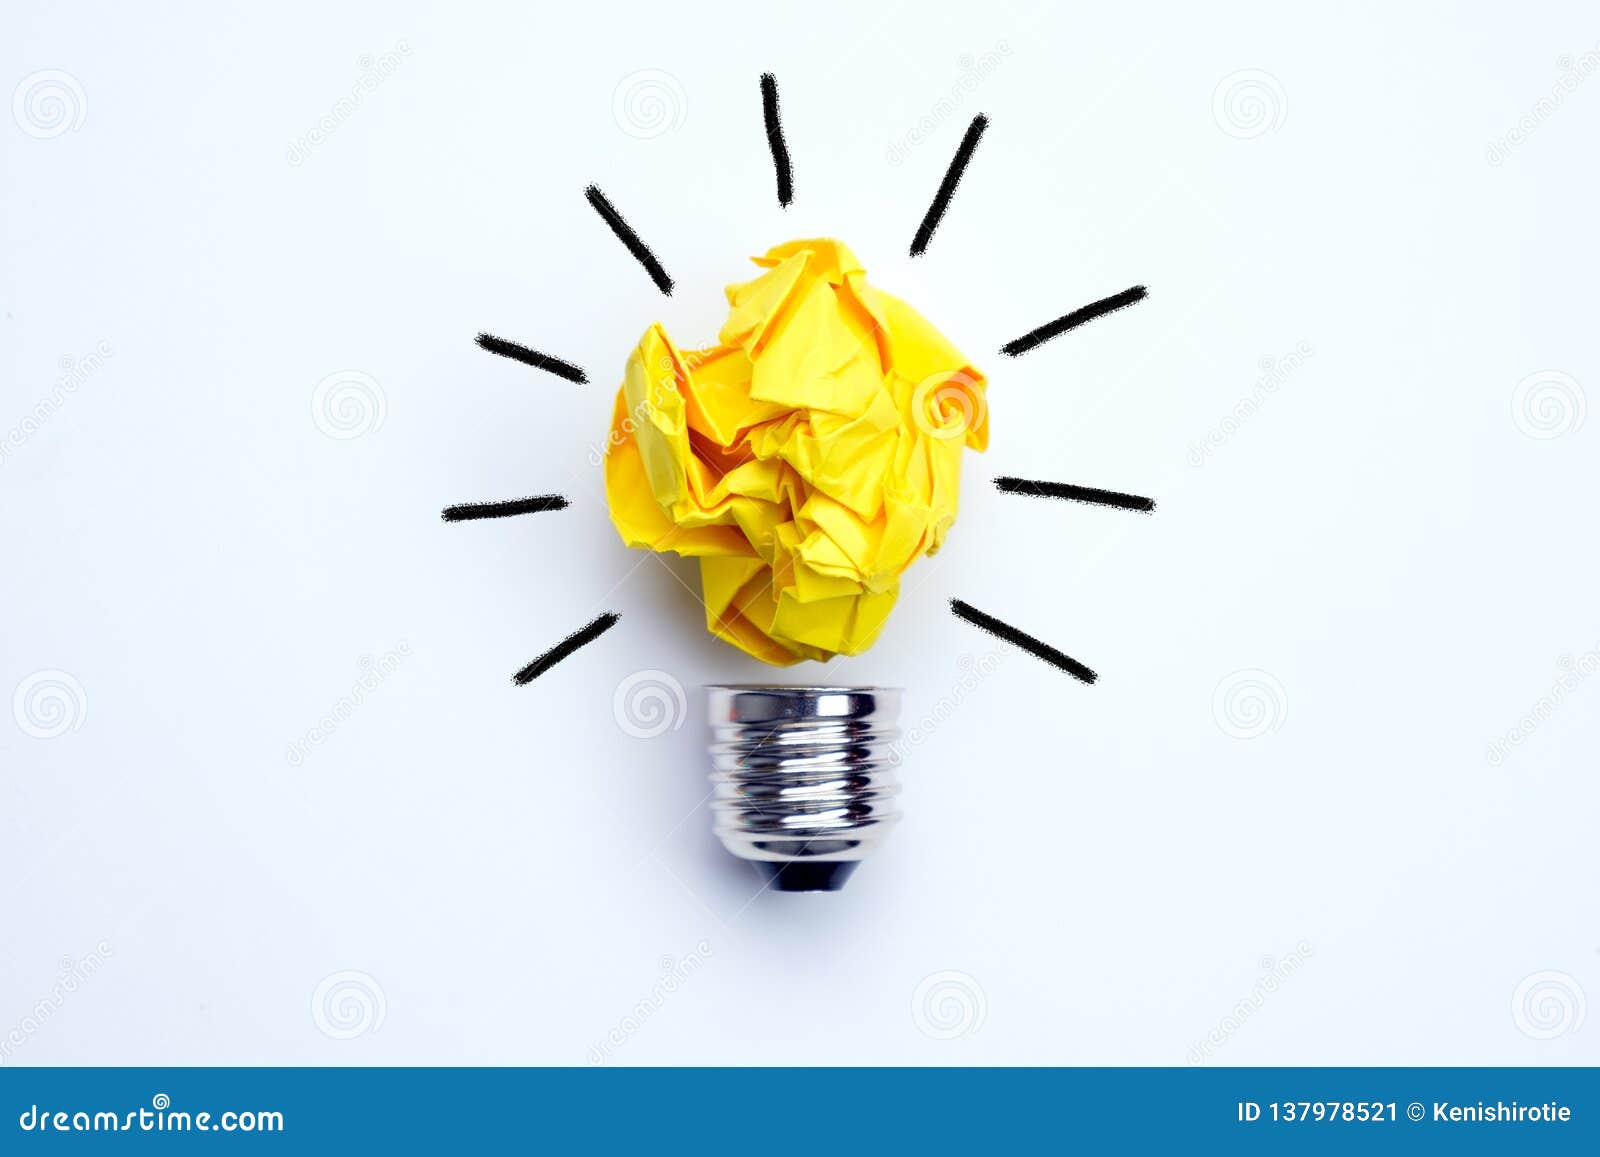 great idea concept with crumpled yellow paper light bulb